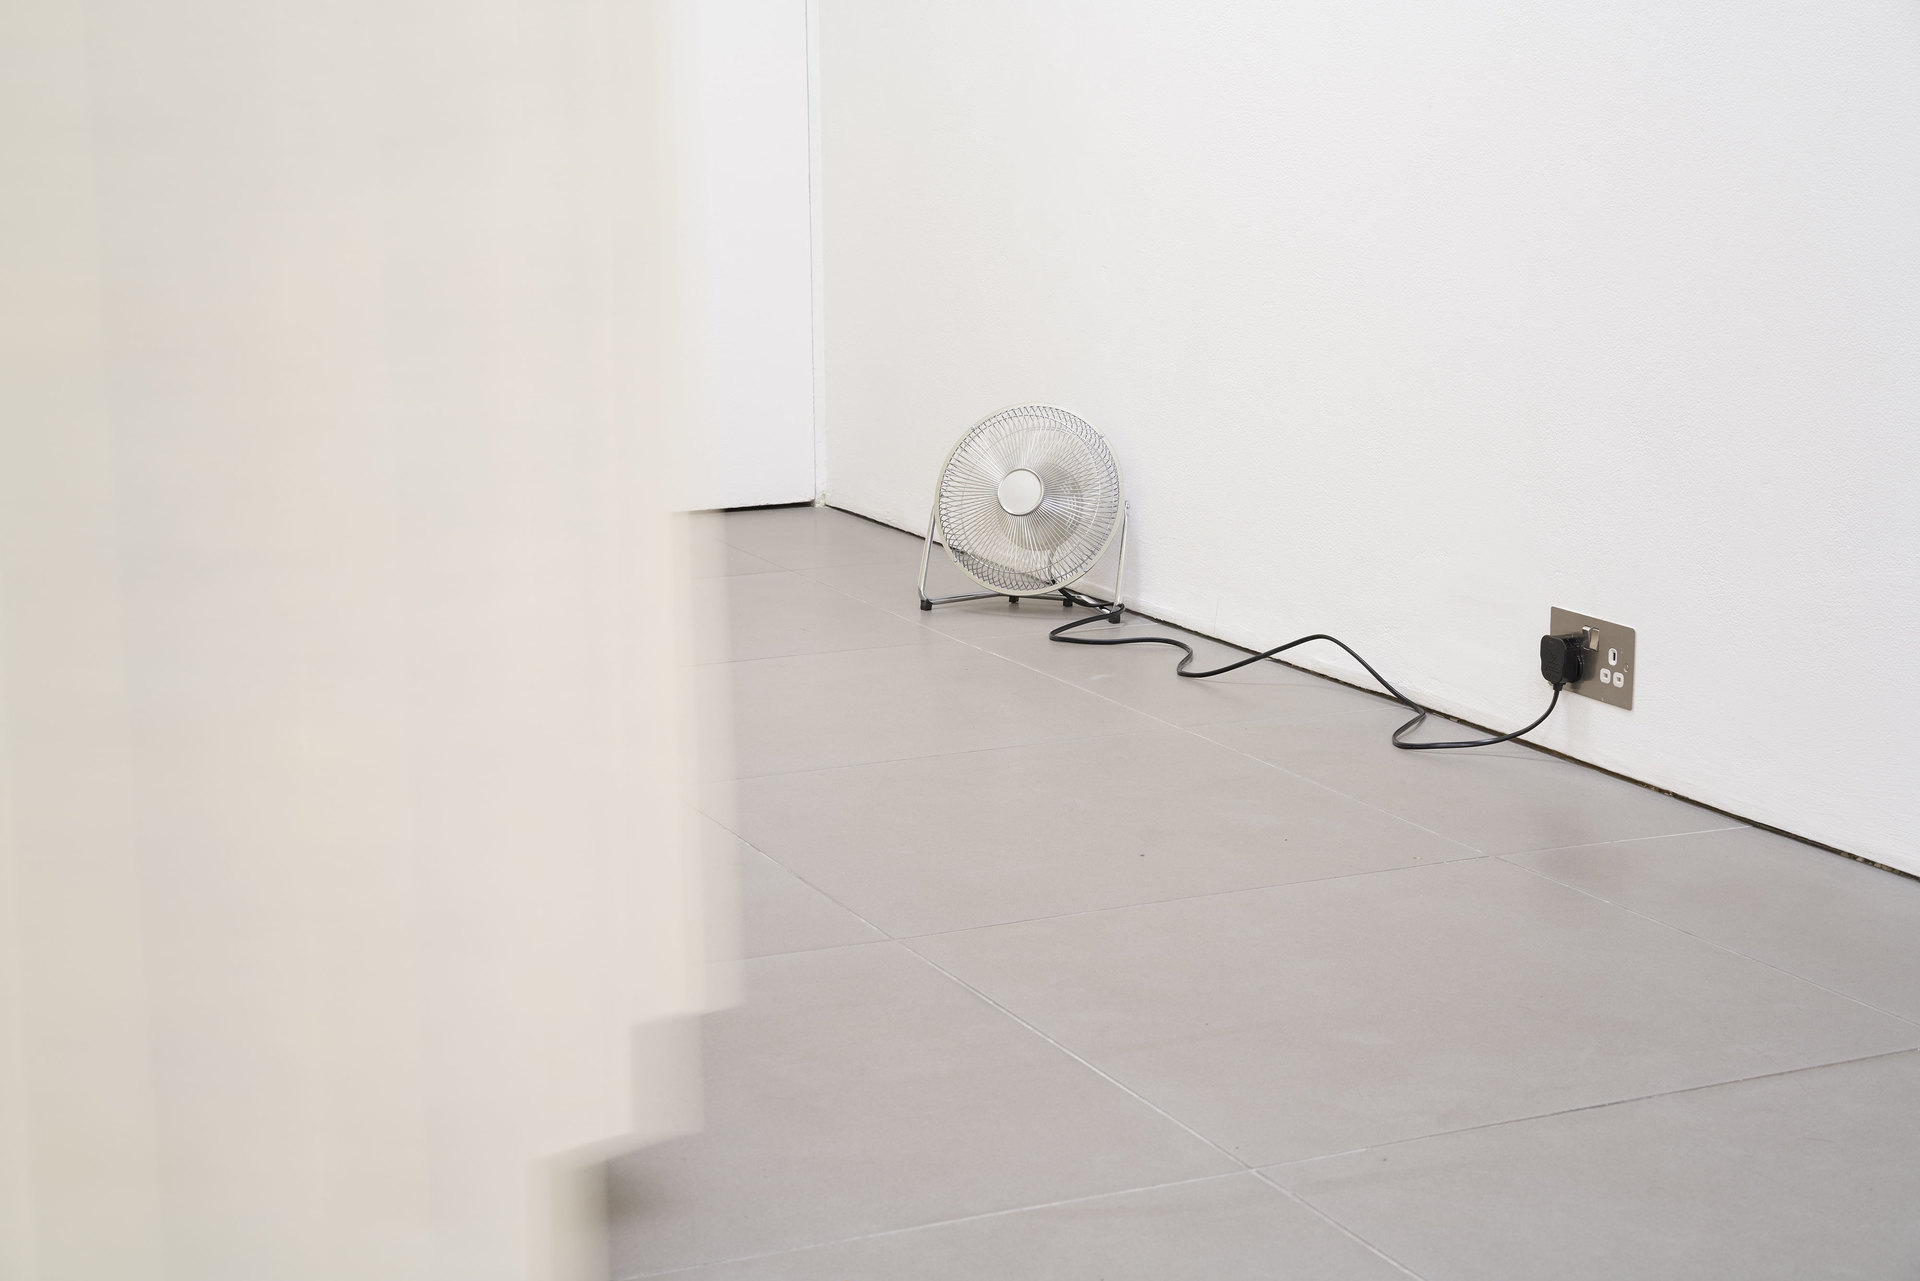 Jos Bitelli, A Partition, installation view, 2016, Cell Project Space